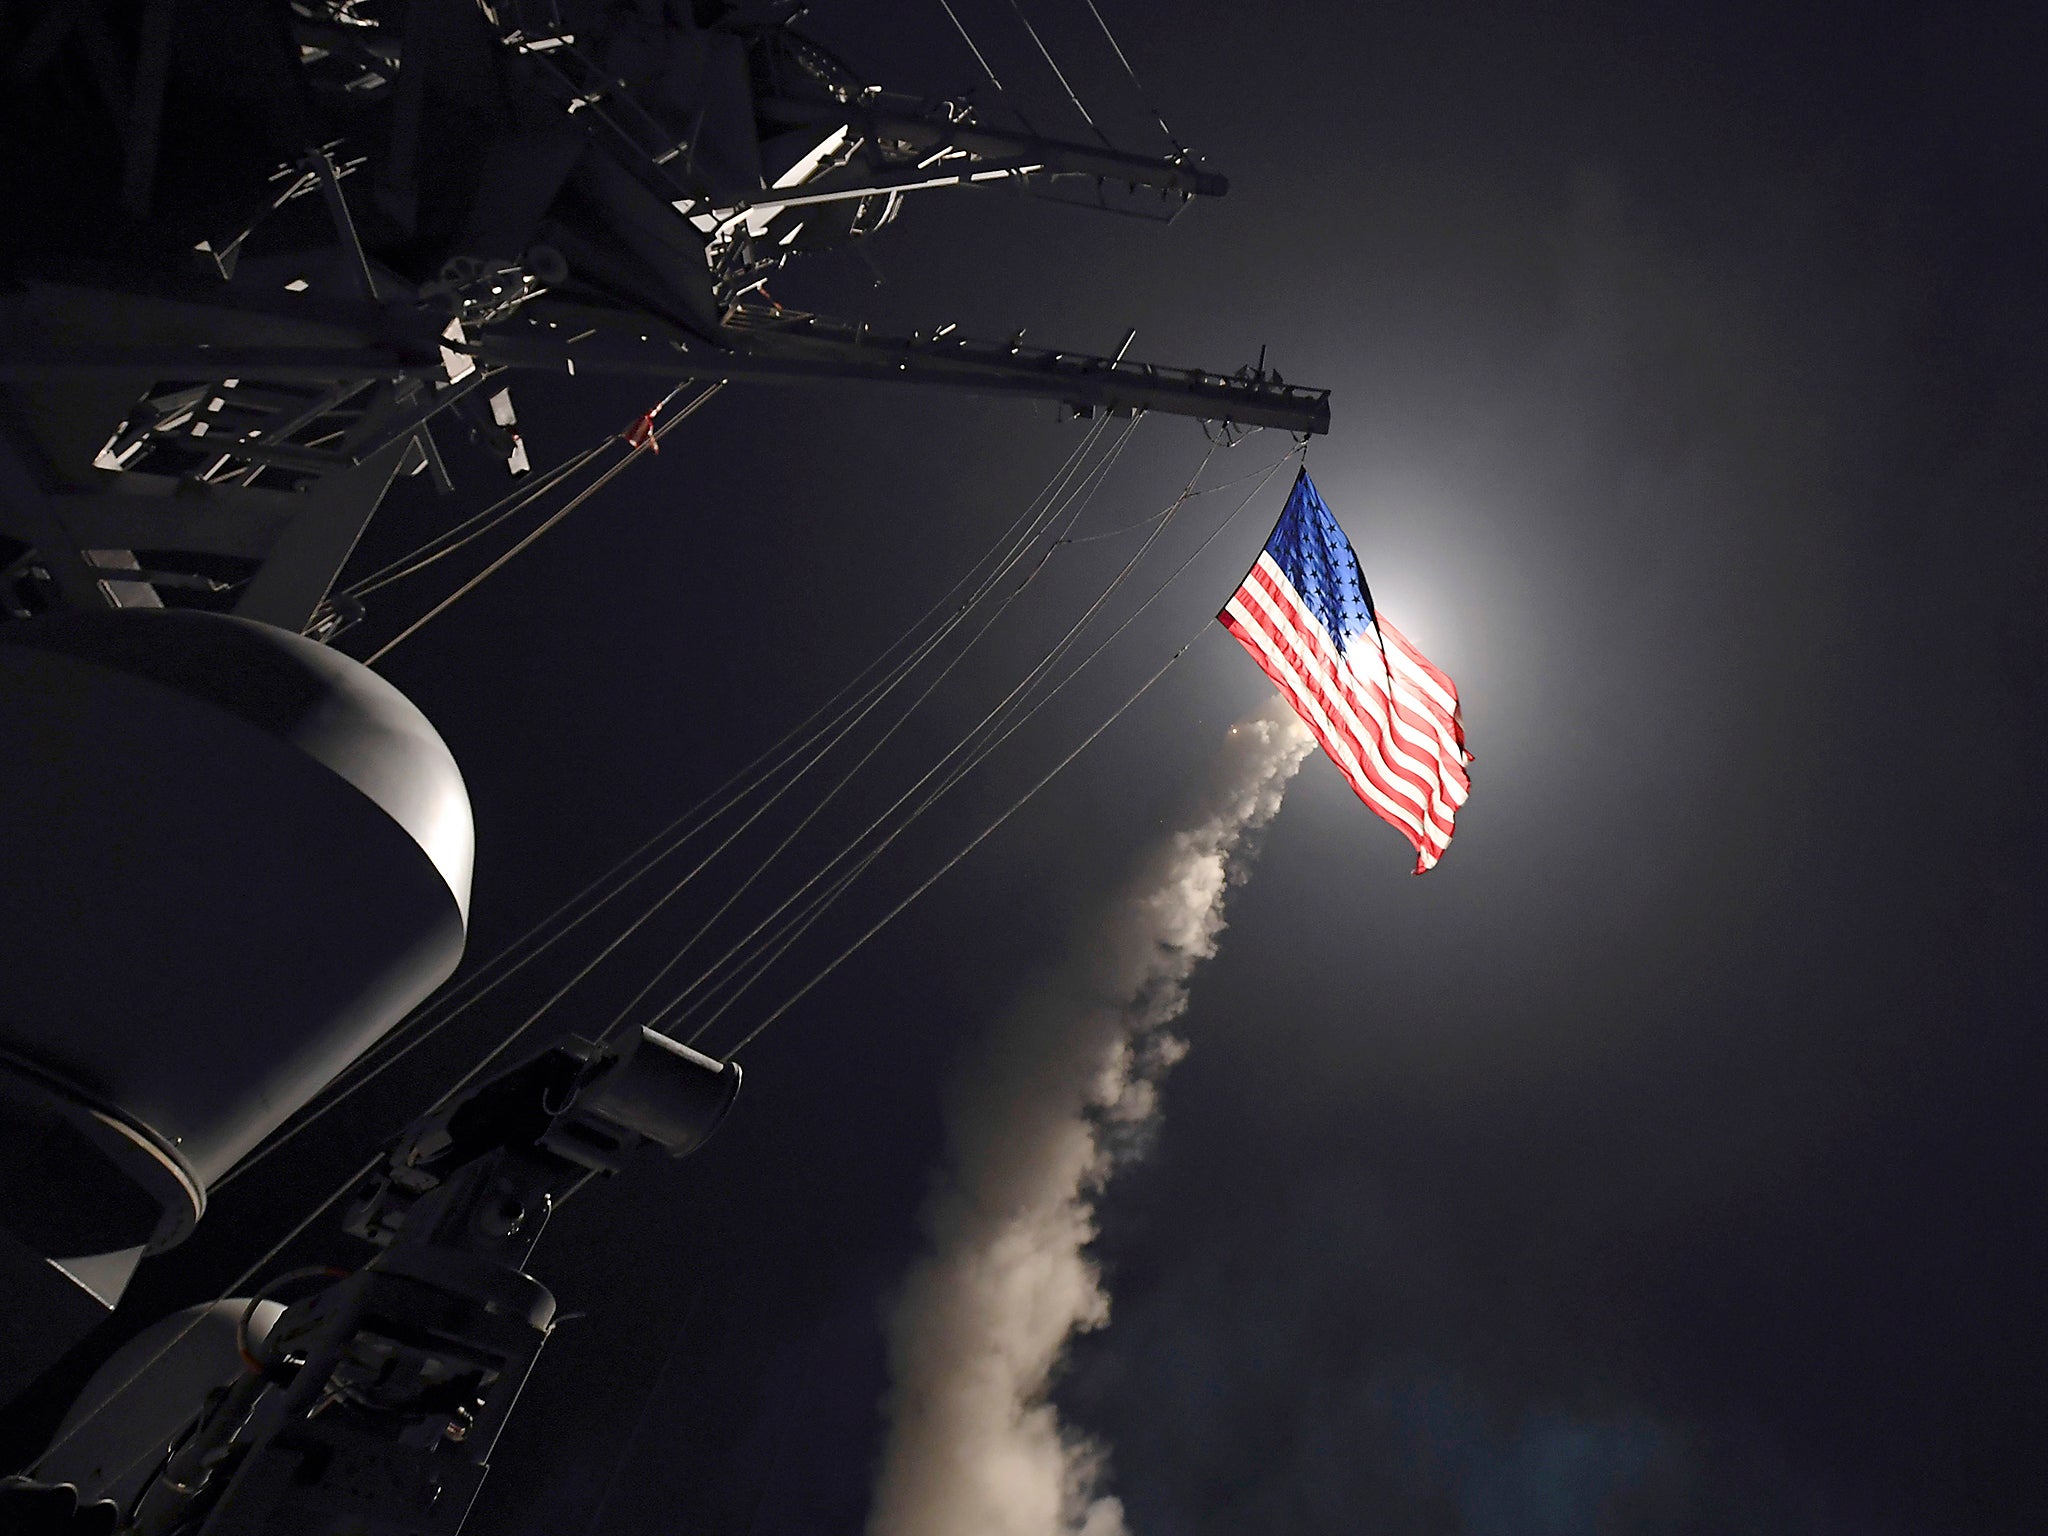 American military might has come too late to solve Syria's complex problems